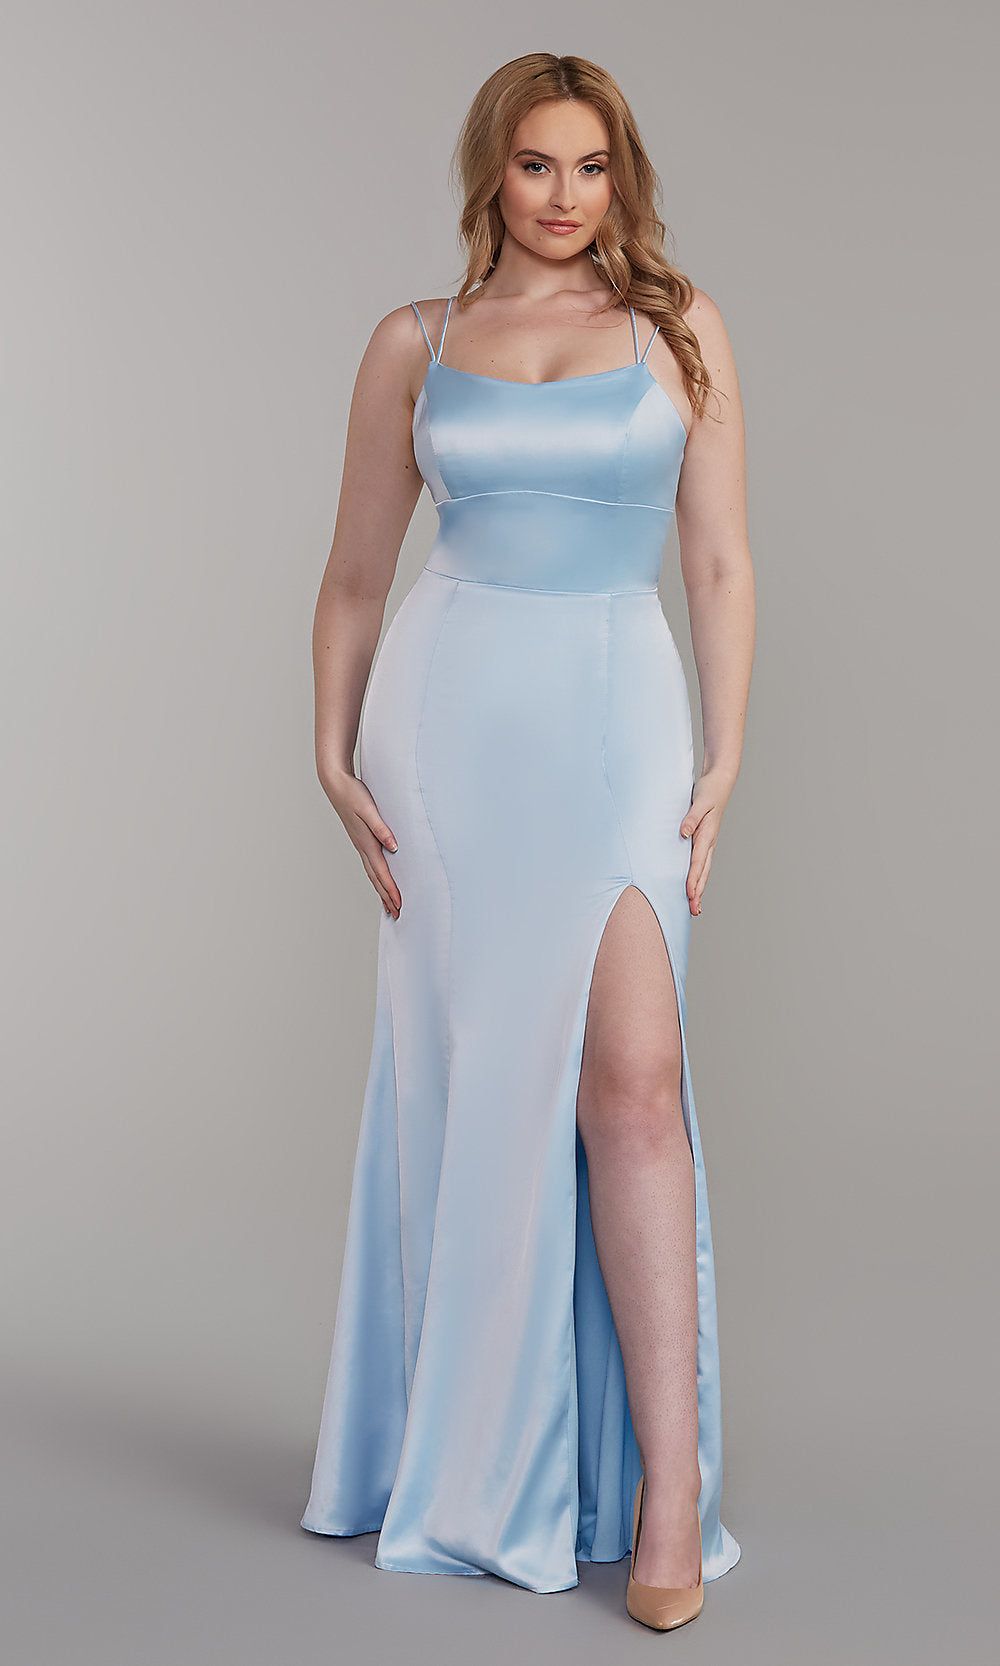  Open-Back Long Empire-Waist Prom Dress by PromGirl